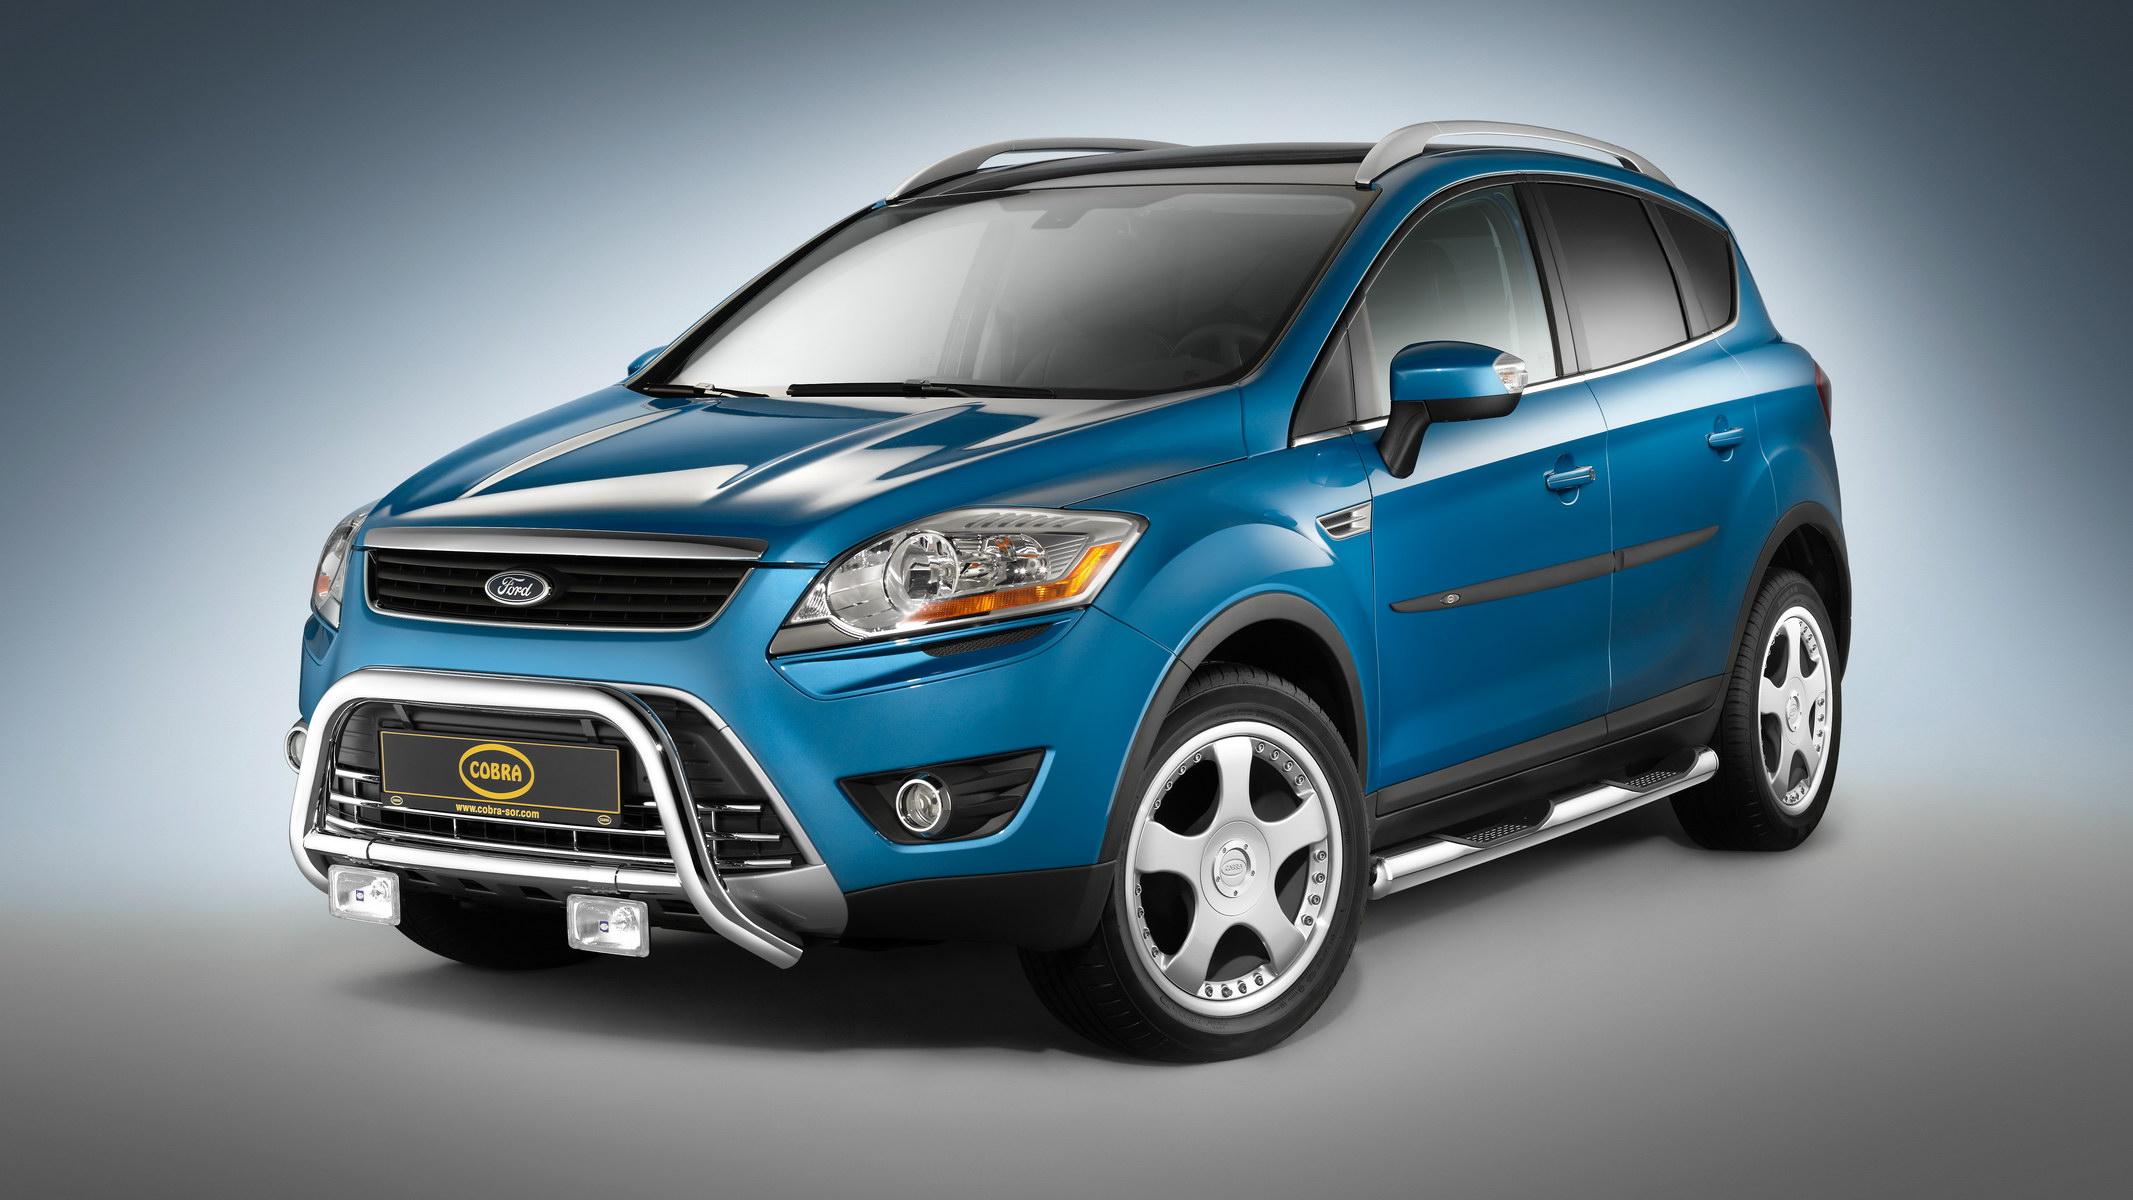 Ford Kuga By Cobra Pictures, Photos, Wallpapers